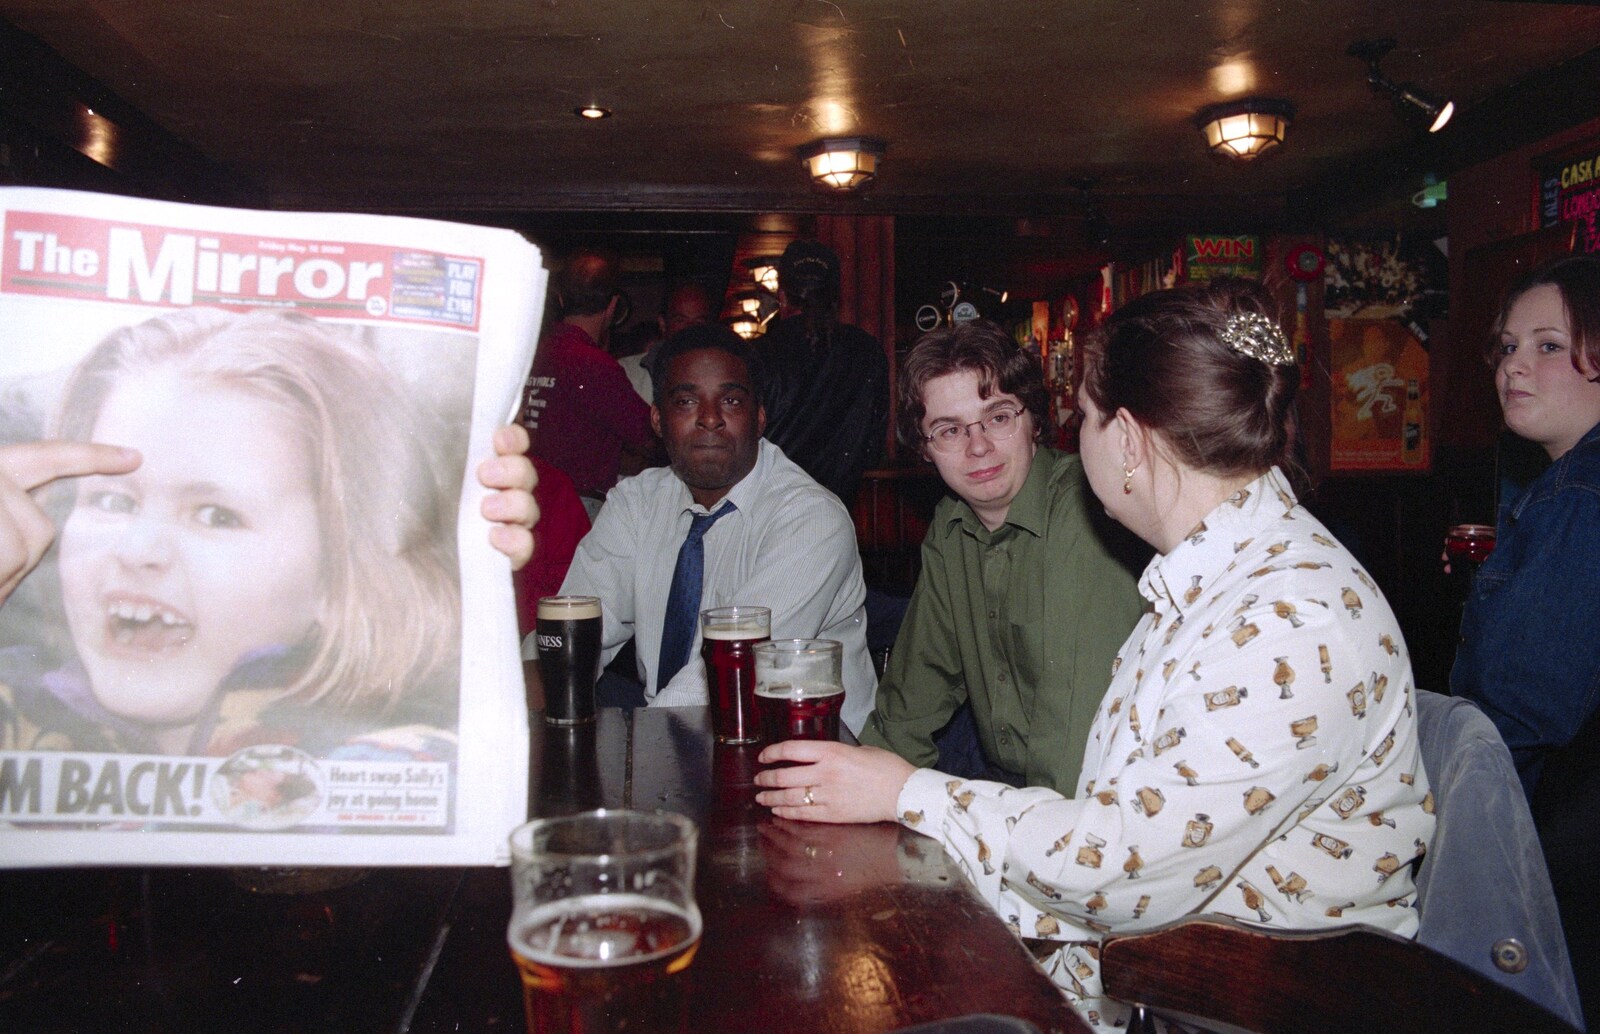 Russell holds up a newspaper with a scary kid  from CISU at the Dhaka Diner, Tacket Street, Ipswich - 25th May 2000